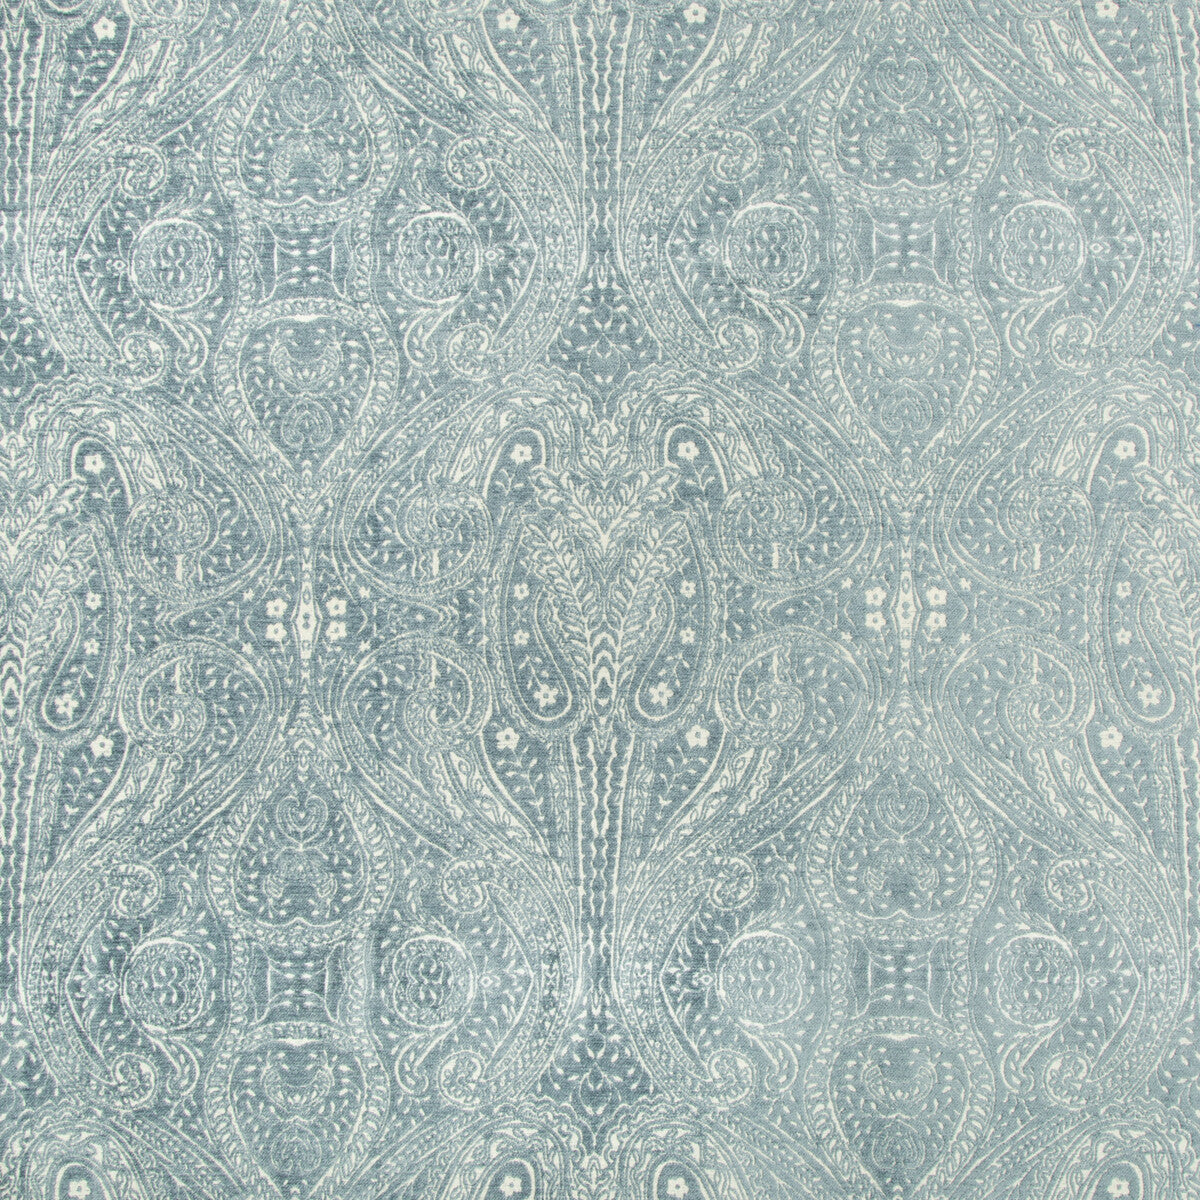 Kravet Contract fabric in 34767-15 color - pattern 34767.15.0 - by Kravet Contract in the Gis collection